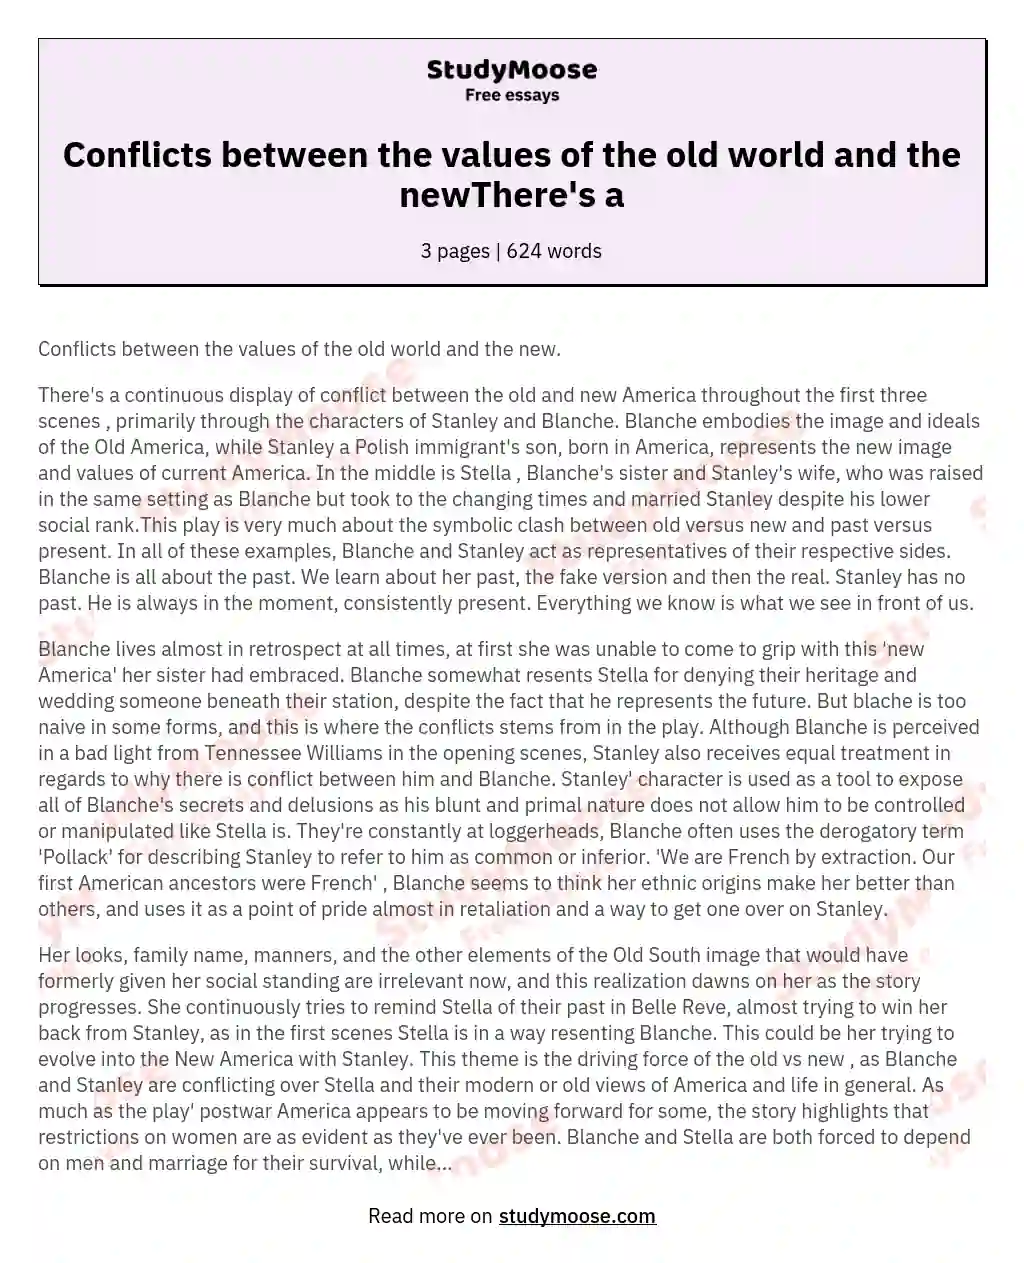 Conflicts between the values of the old world and the newThere's a essay